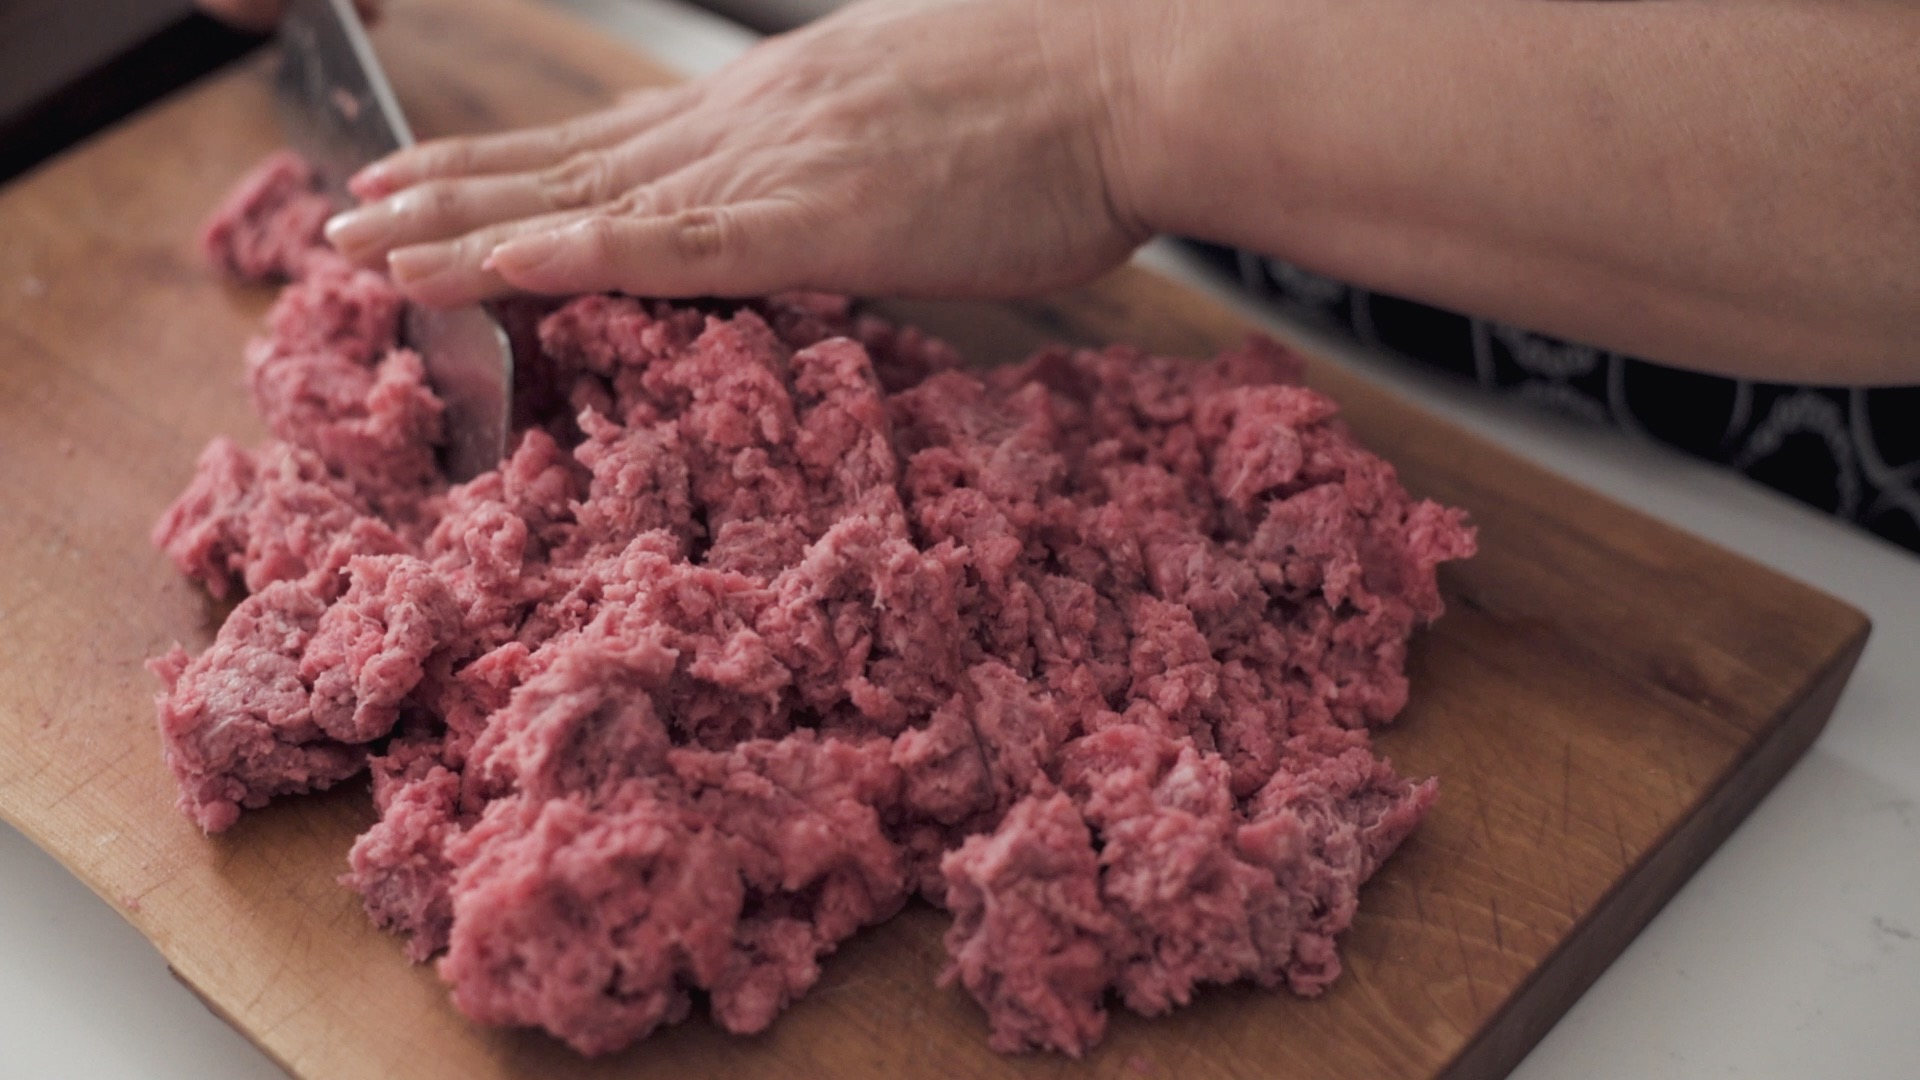 A knife chopping ground beef brisket.